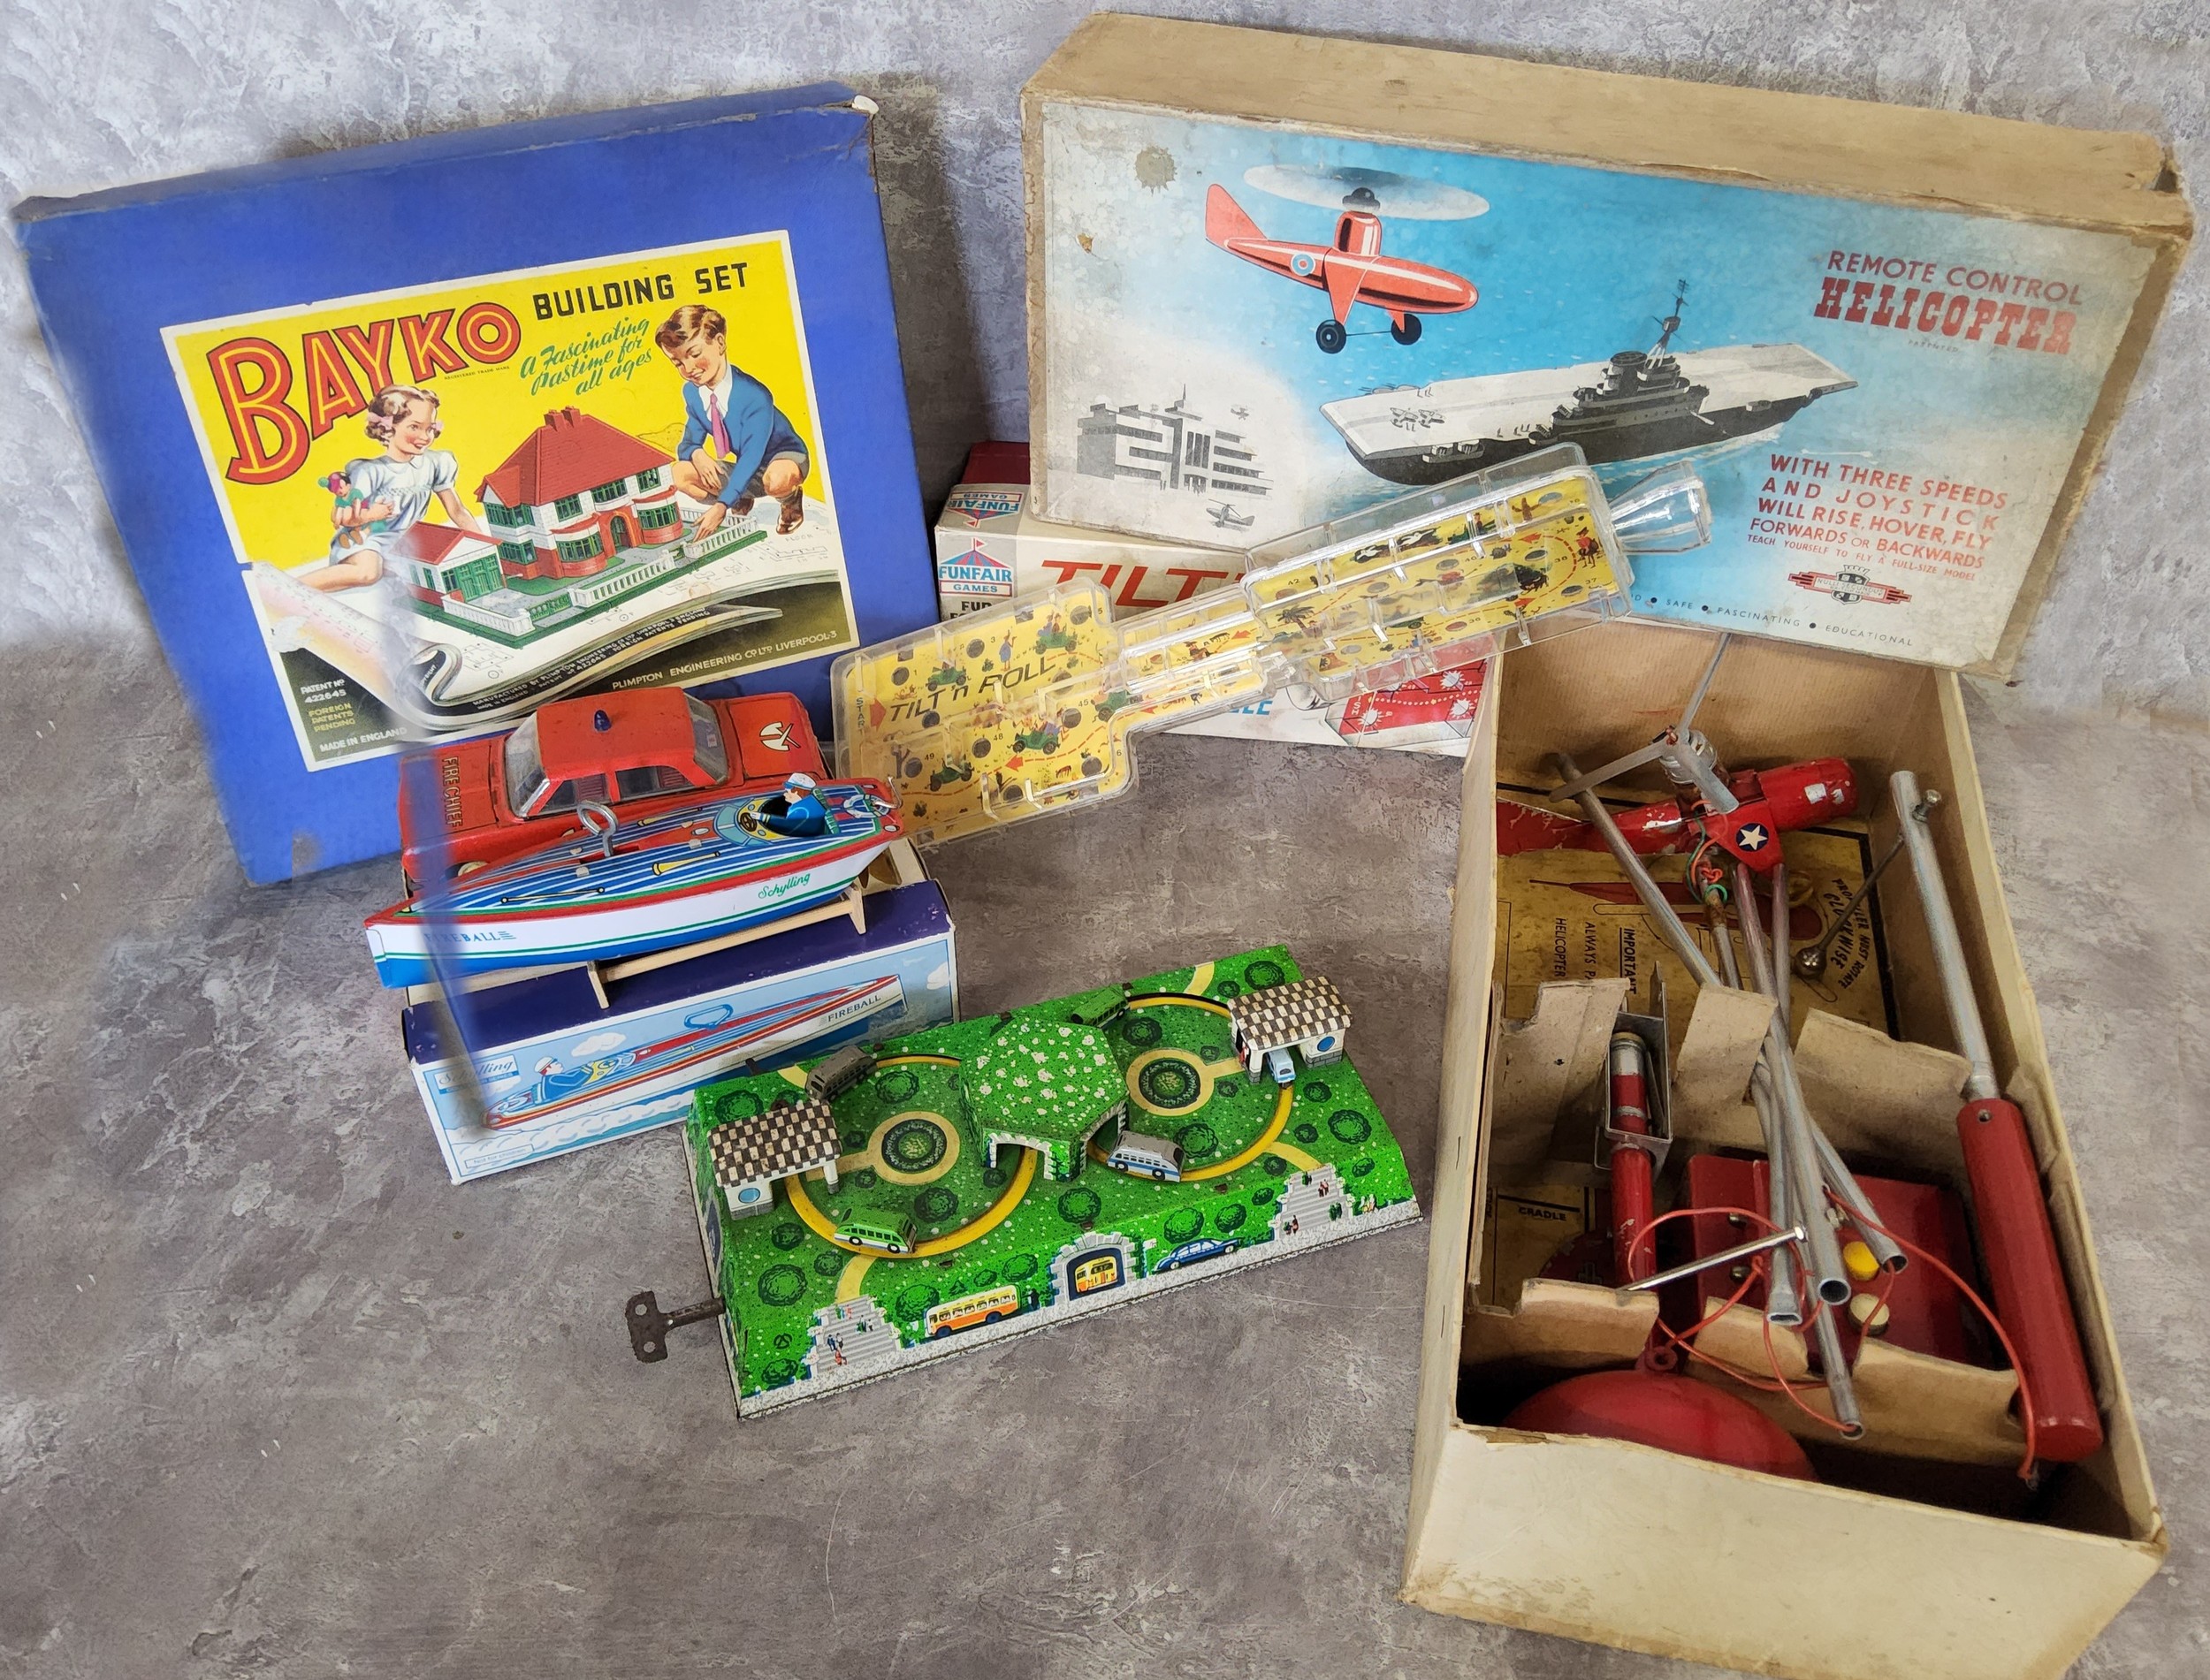 A 1955 Nulli Secundus Remote Control Helicopter, boxed (not checked); a vintage Russian ABTO